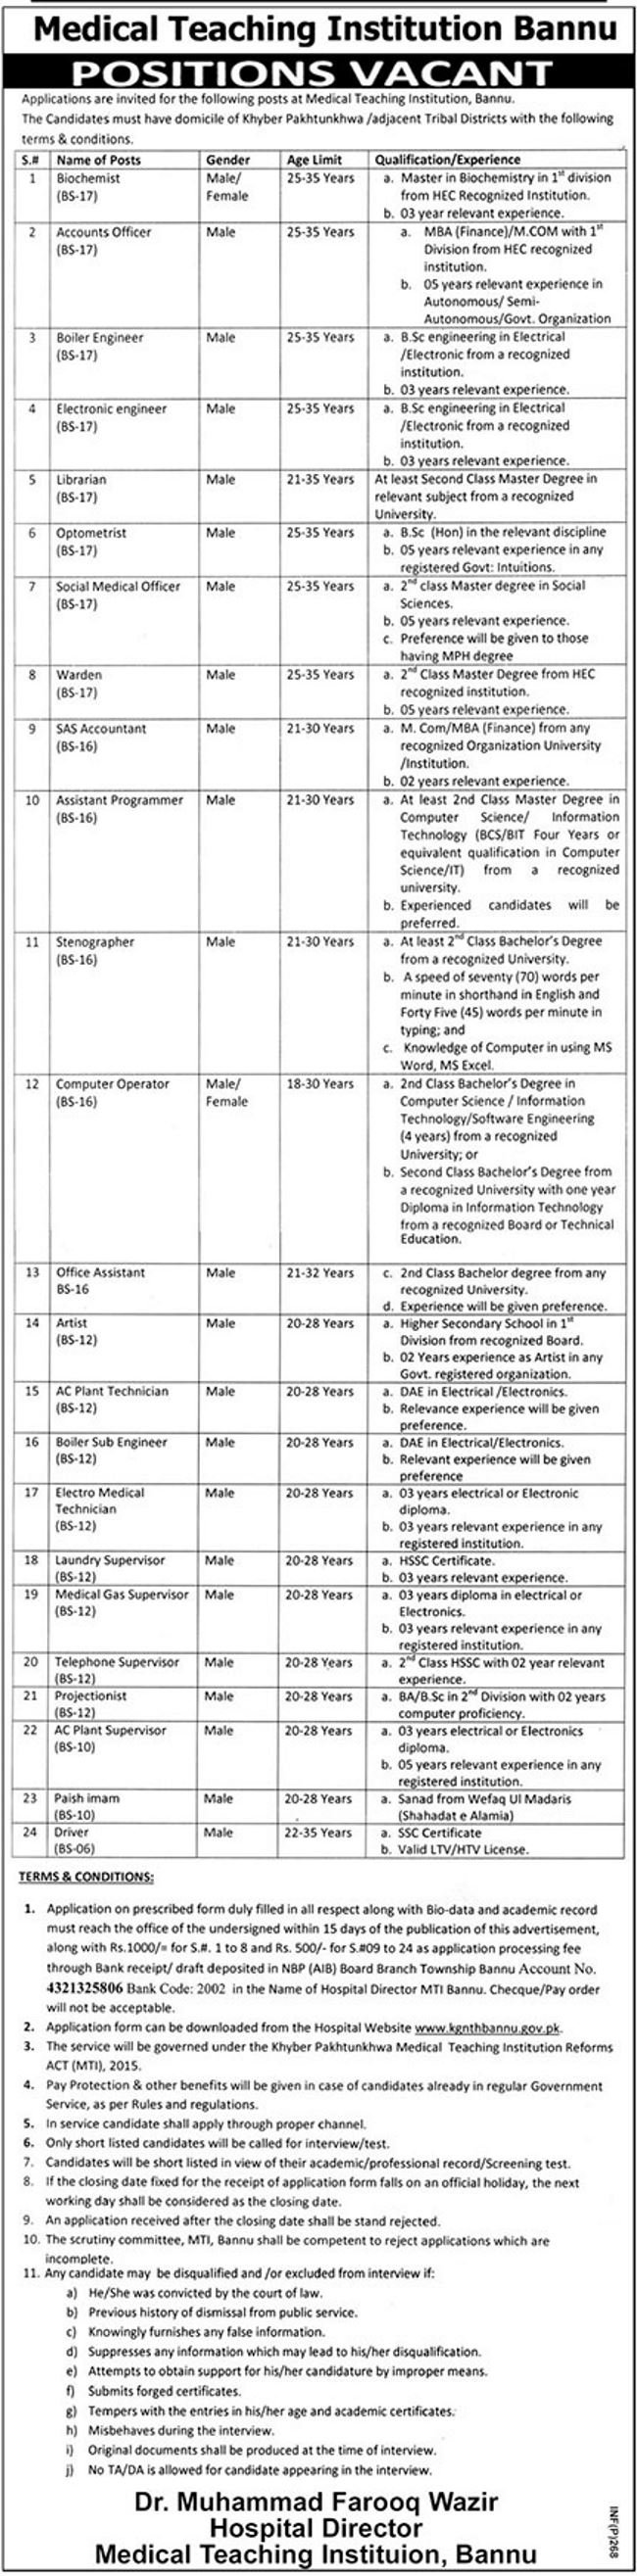 Bannu Medical Teaching Institution Jobs 2019 for Admin, Accounts, IT, Medical, Technical & Support Staff